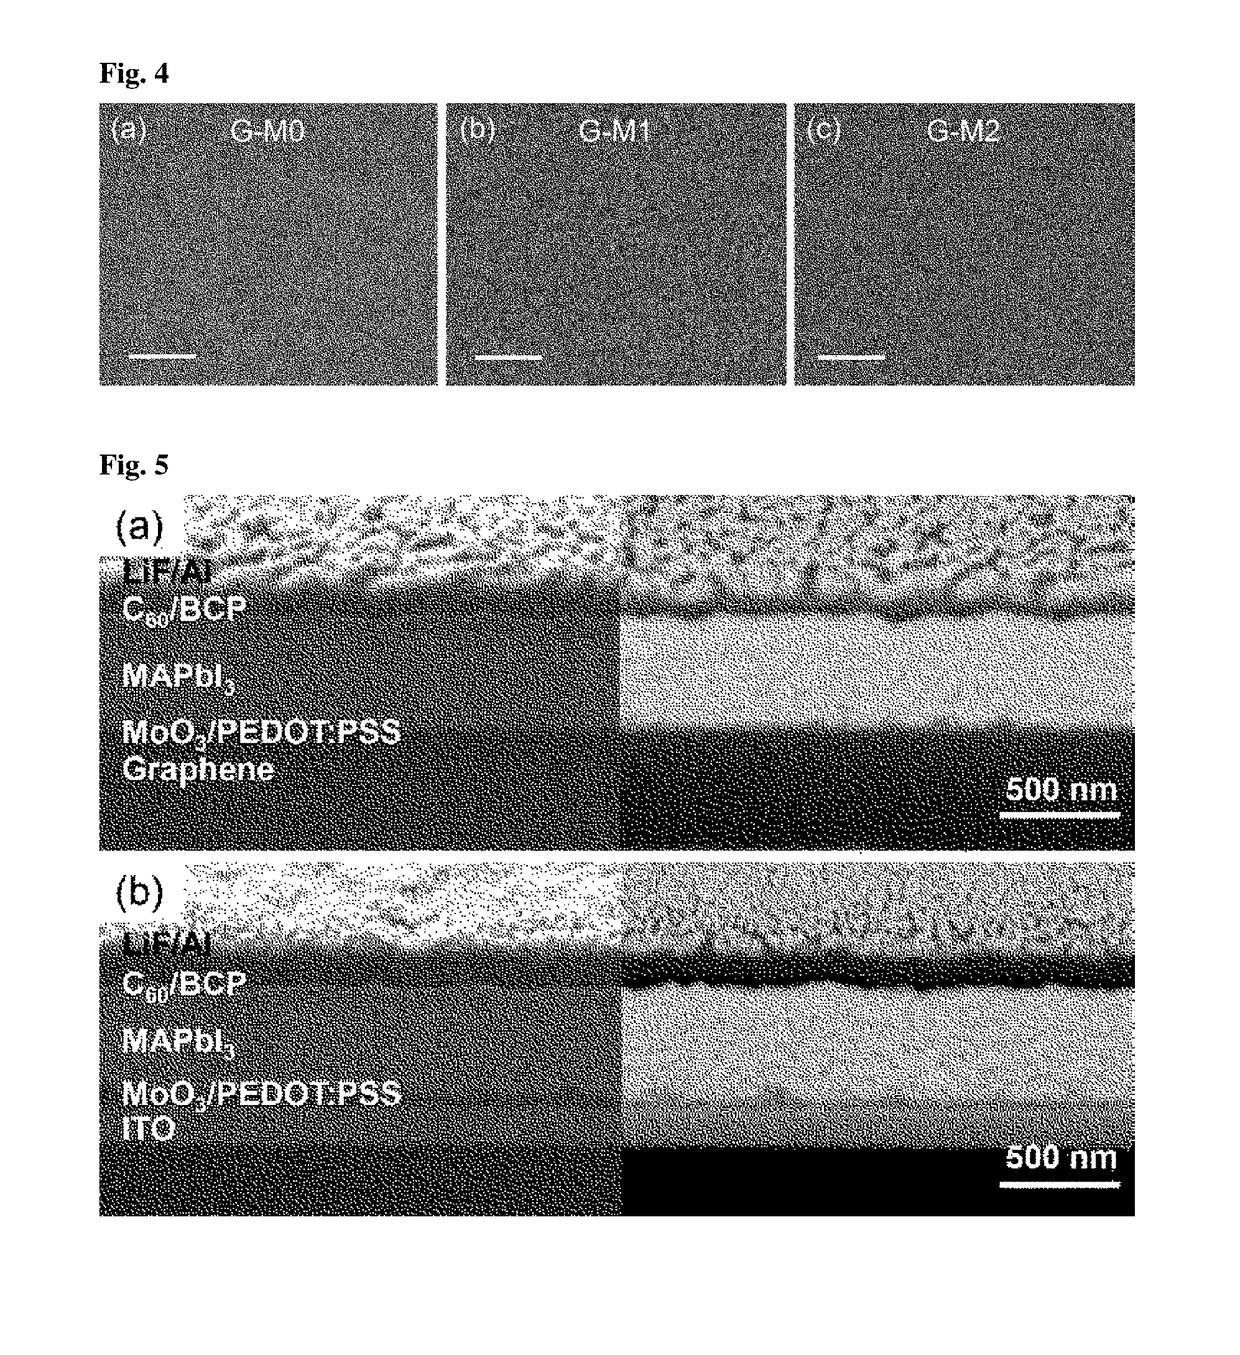 Perovskite-based solar cell using graphene as conductive transparent electrode